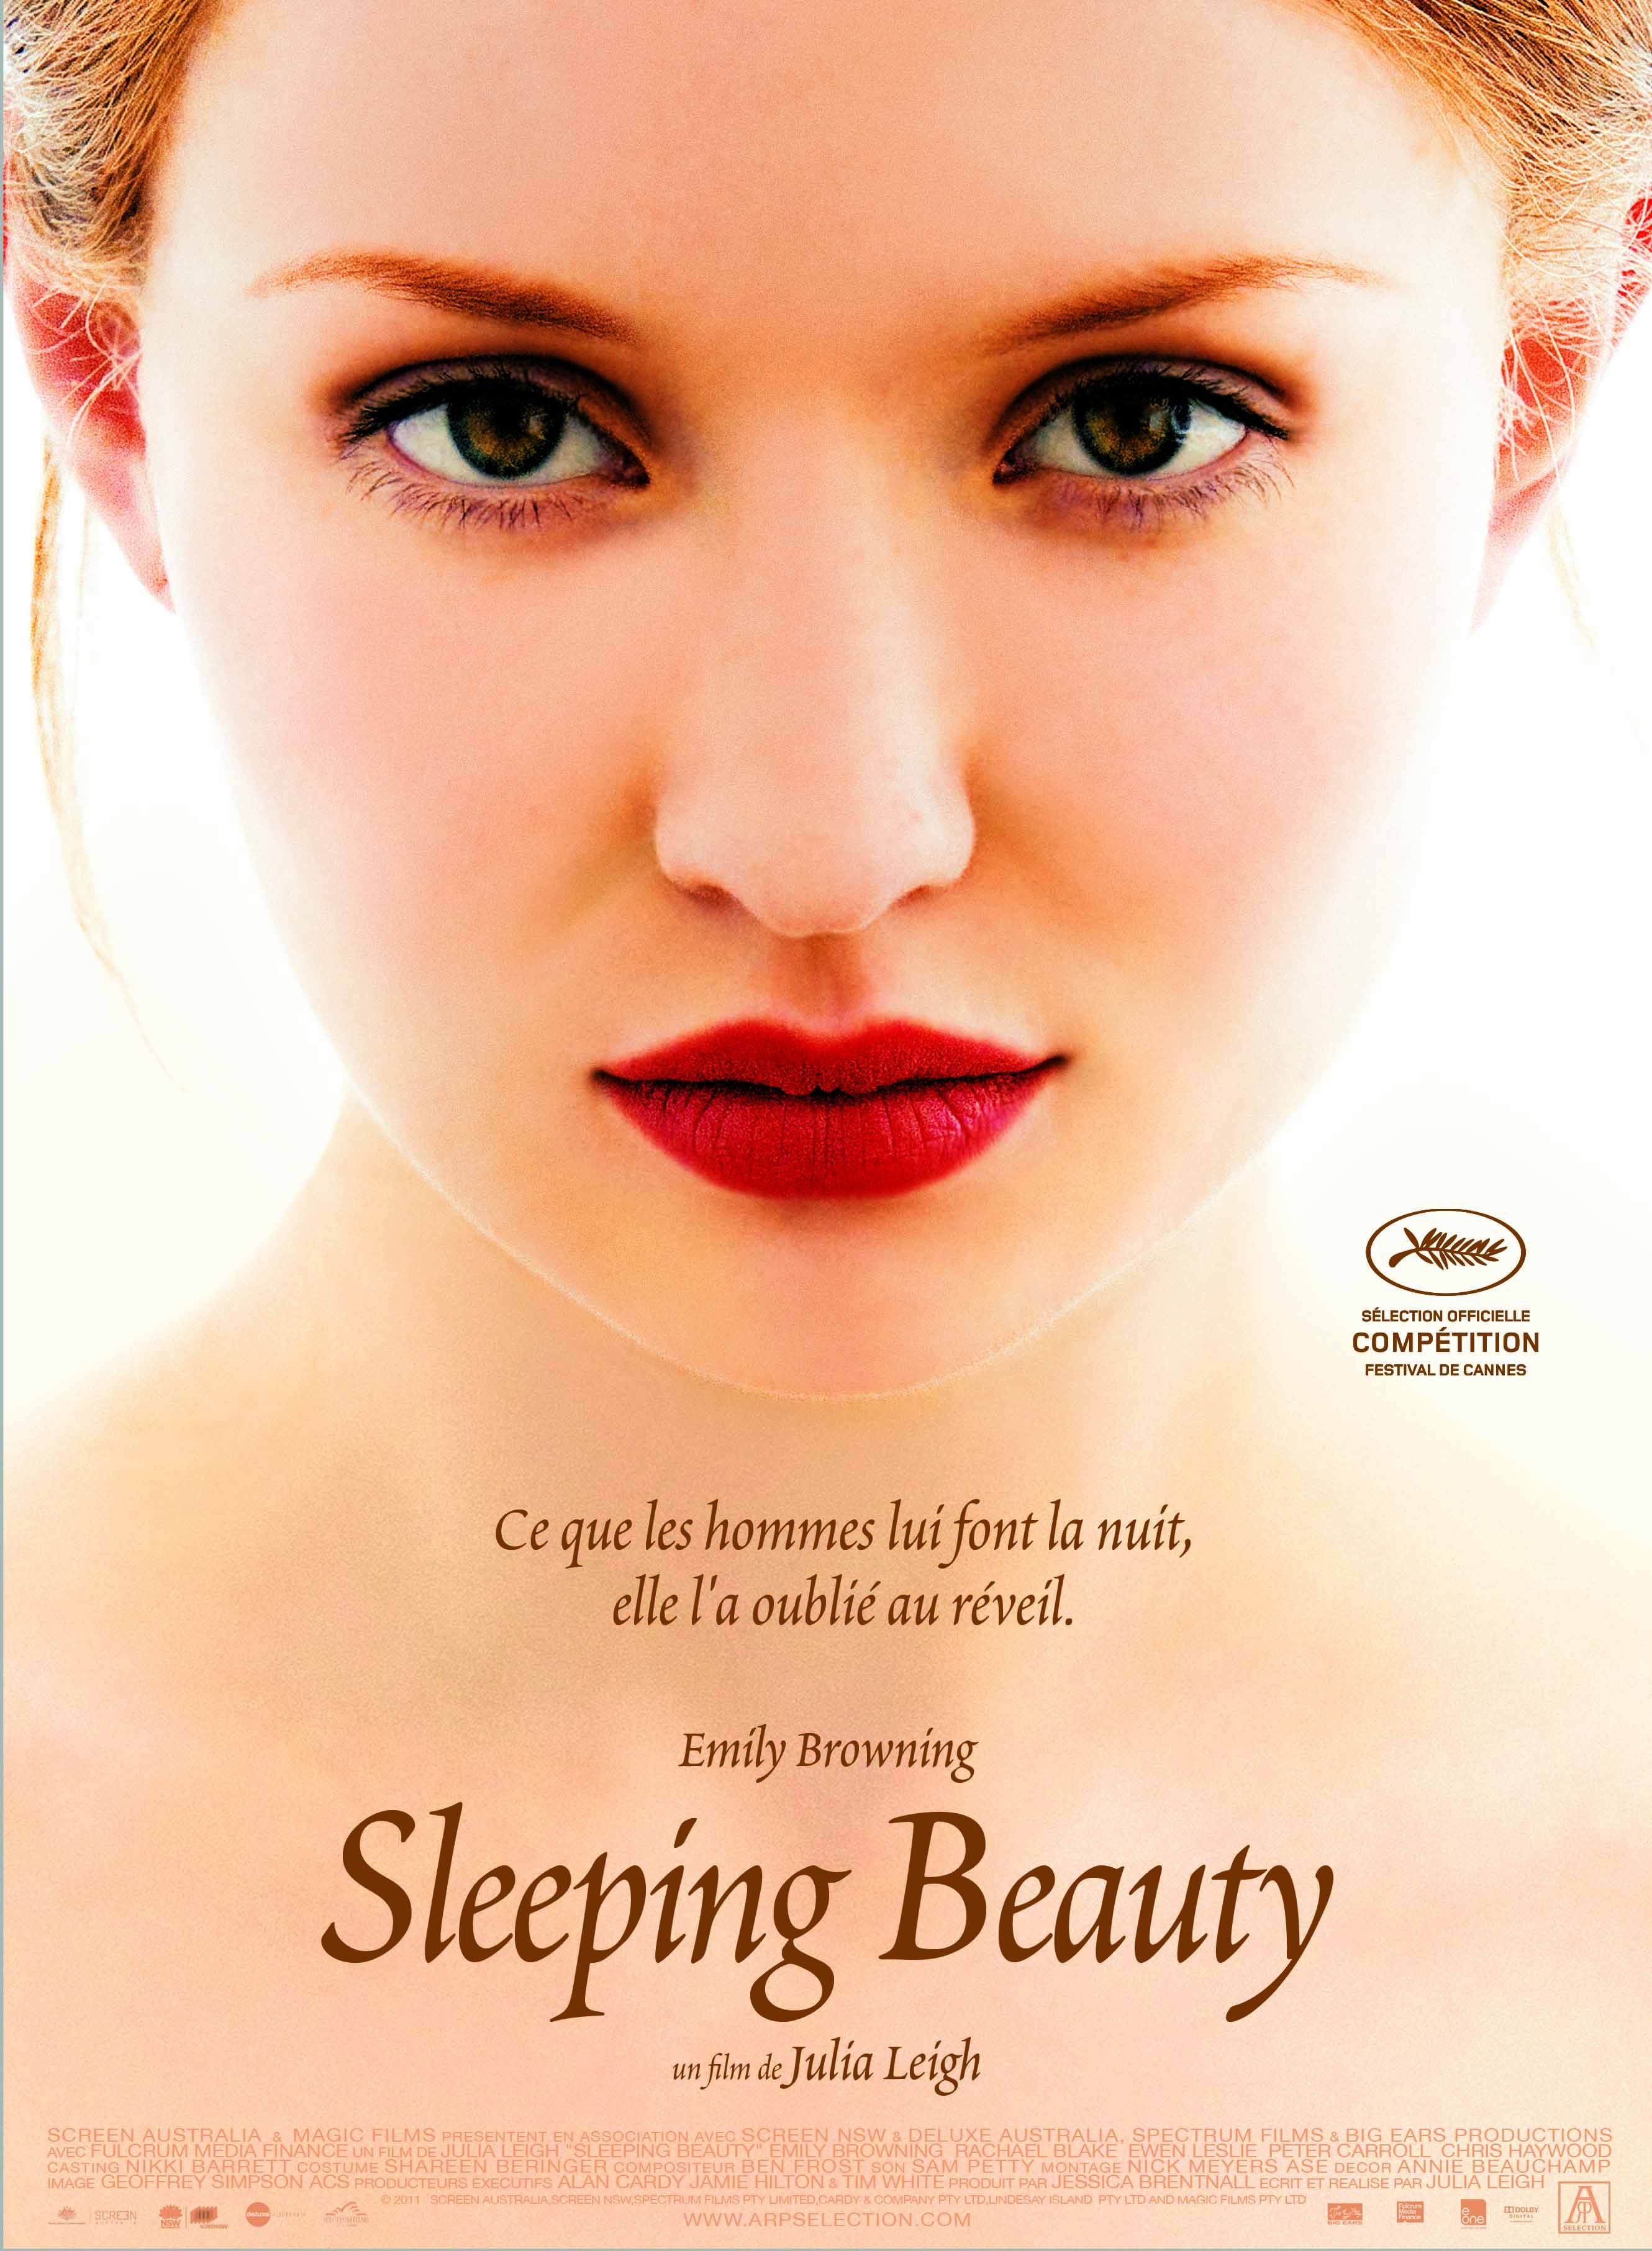 april gillett recommends sleeping beauty 2011 online pic